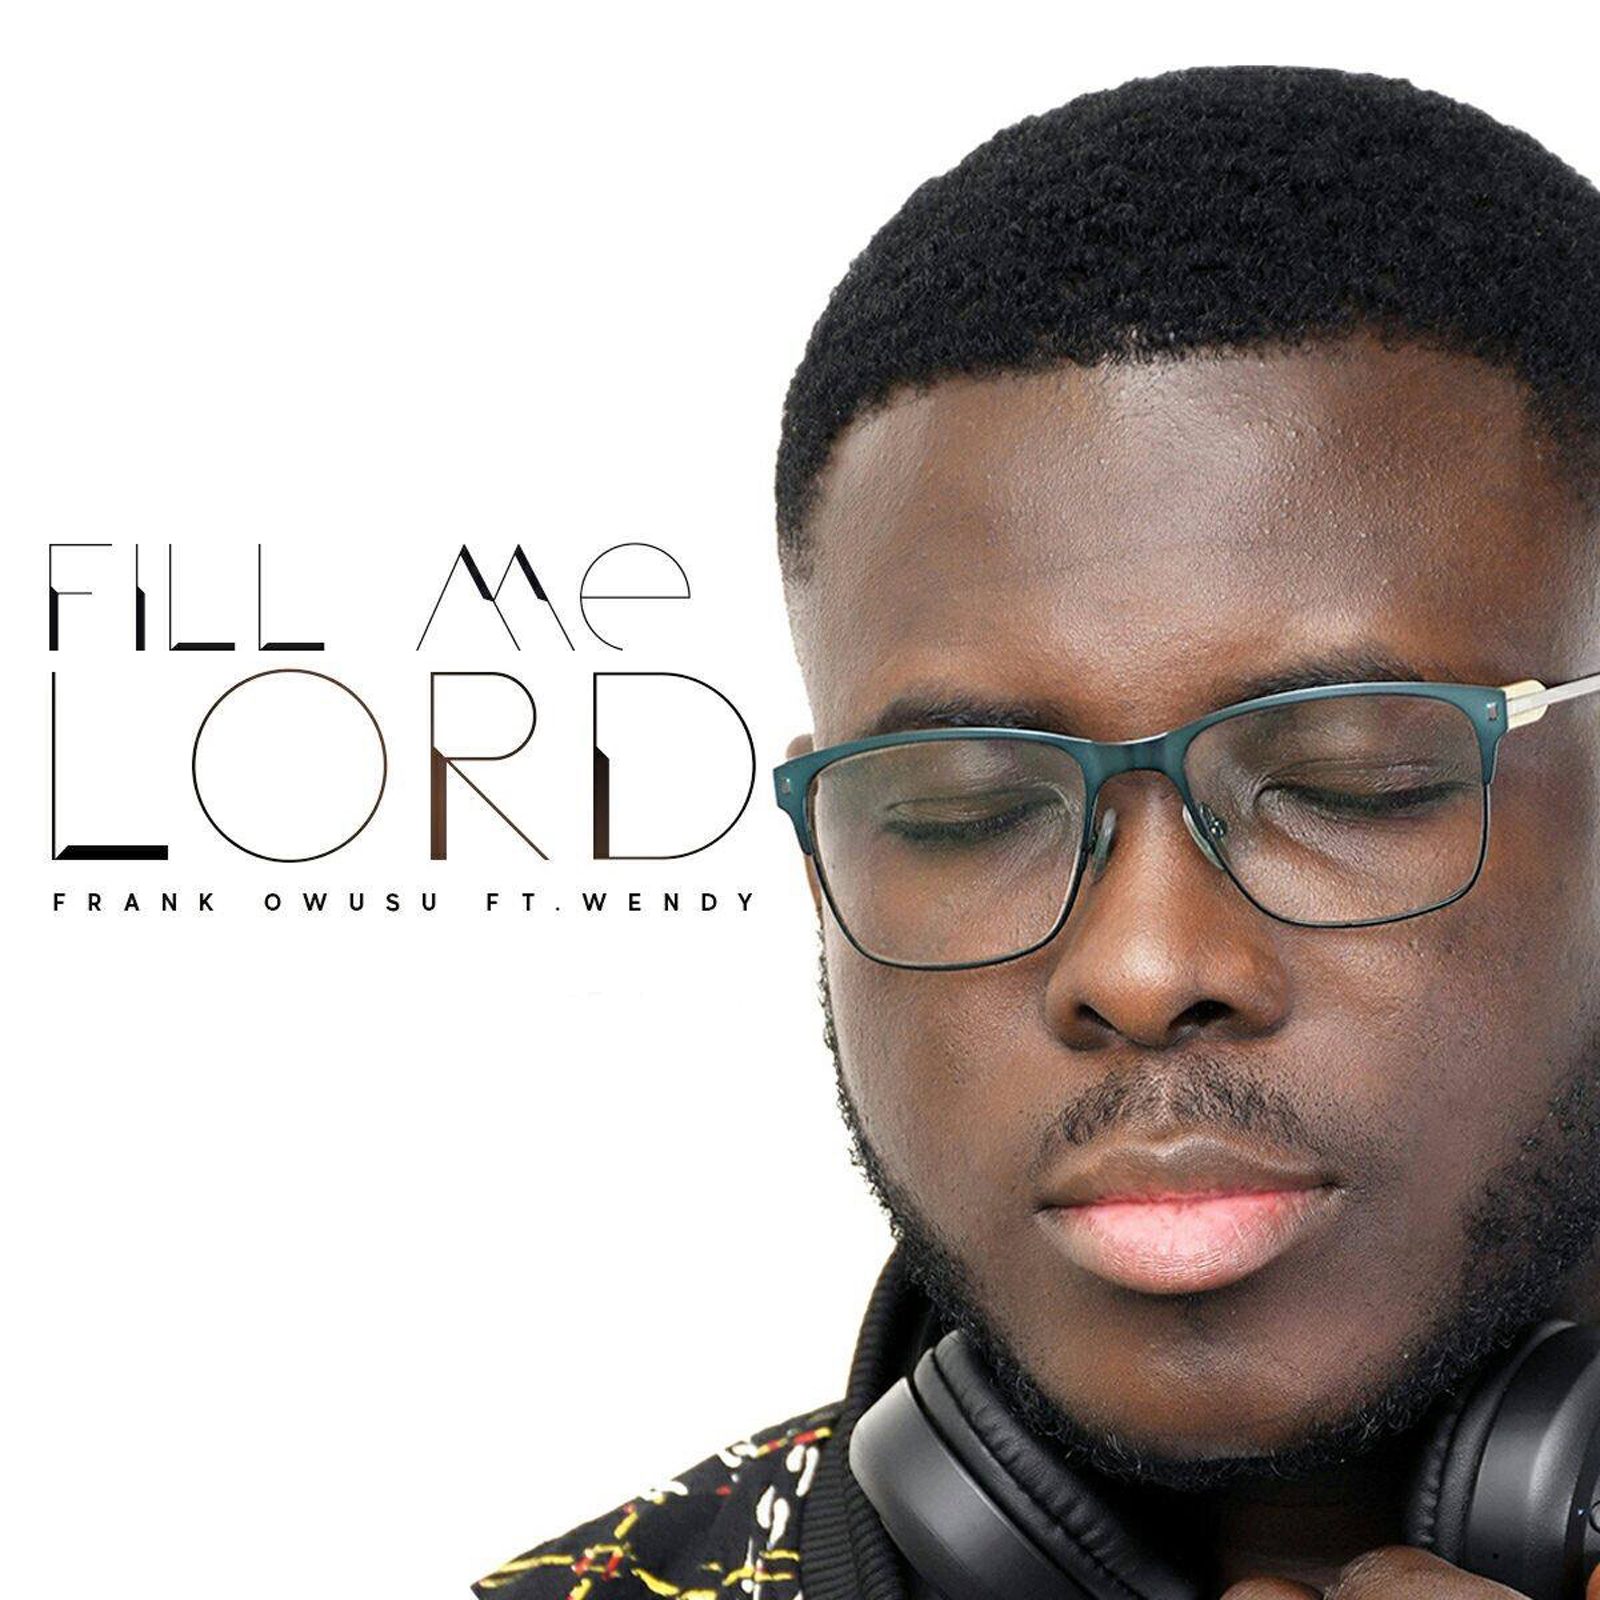 Gospel Musician Frank Owusu Release “Fill me lord” Featuring Wendy.